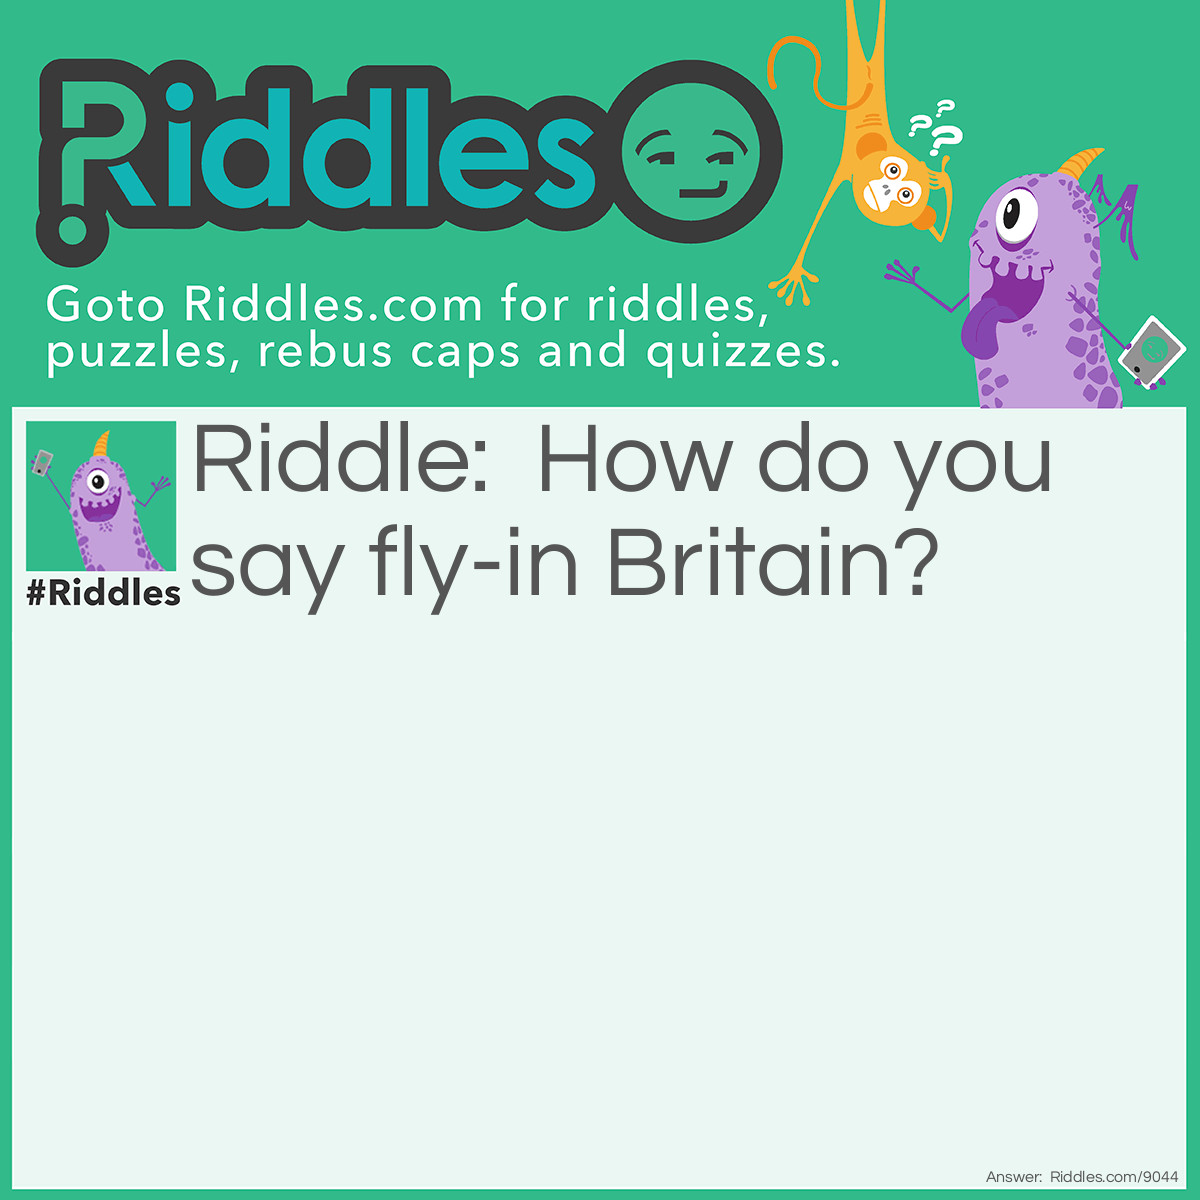 Riddle: How do you say fly-in Britain? Answer: Wingardium leviosa!!!! A magic word in the wizarding world of Harry Potter and objects are expected to fly.